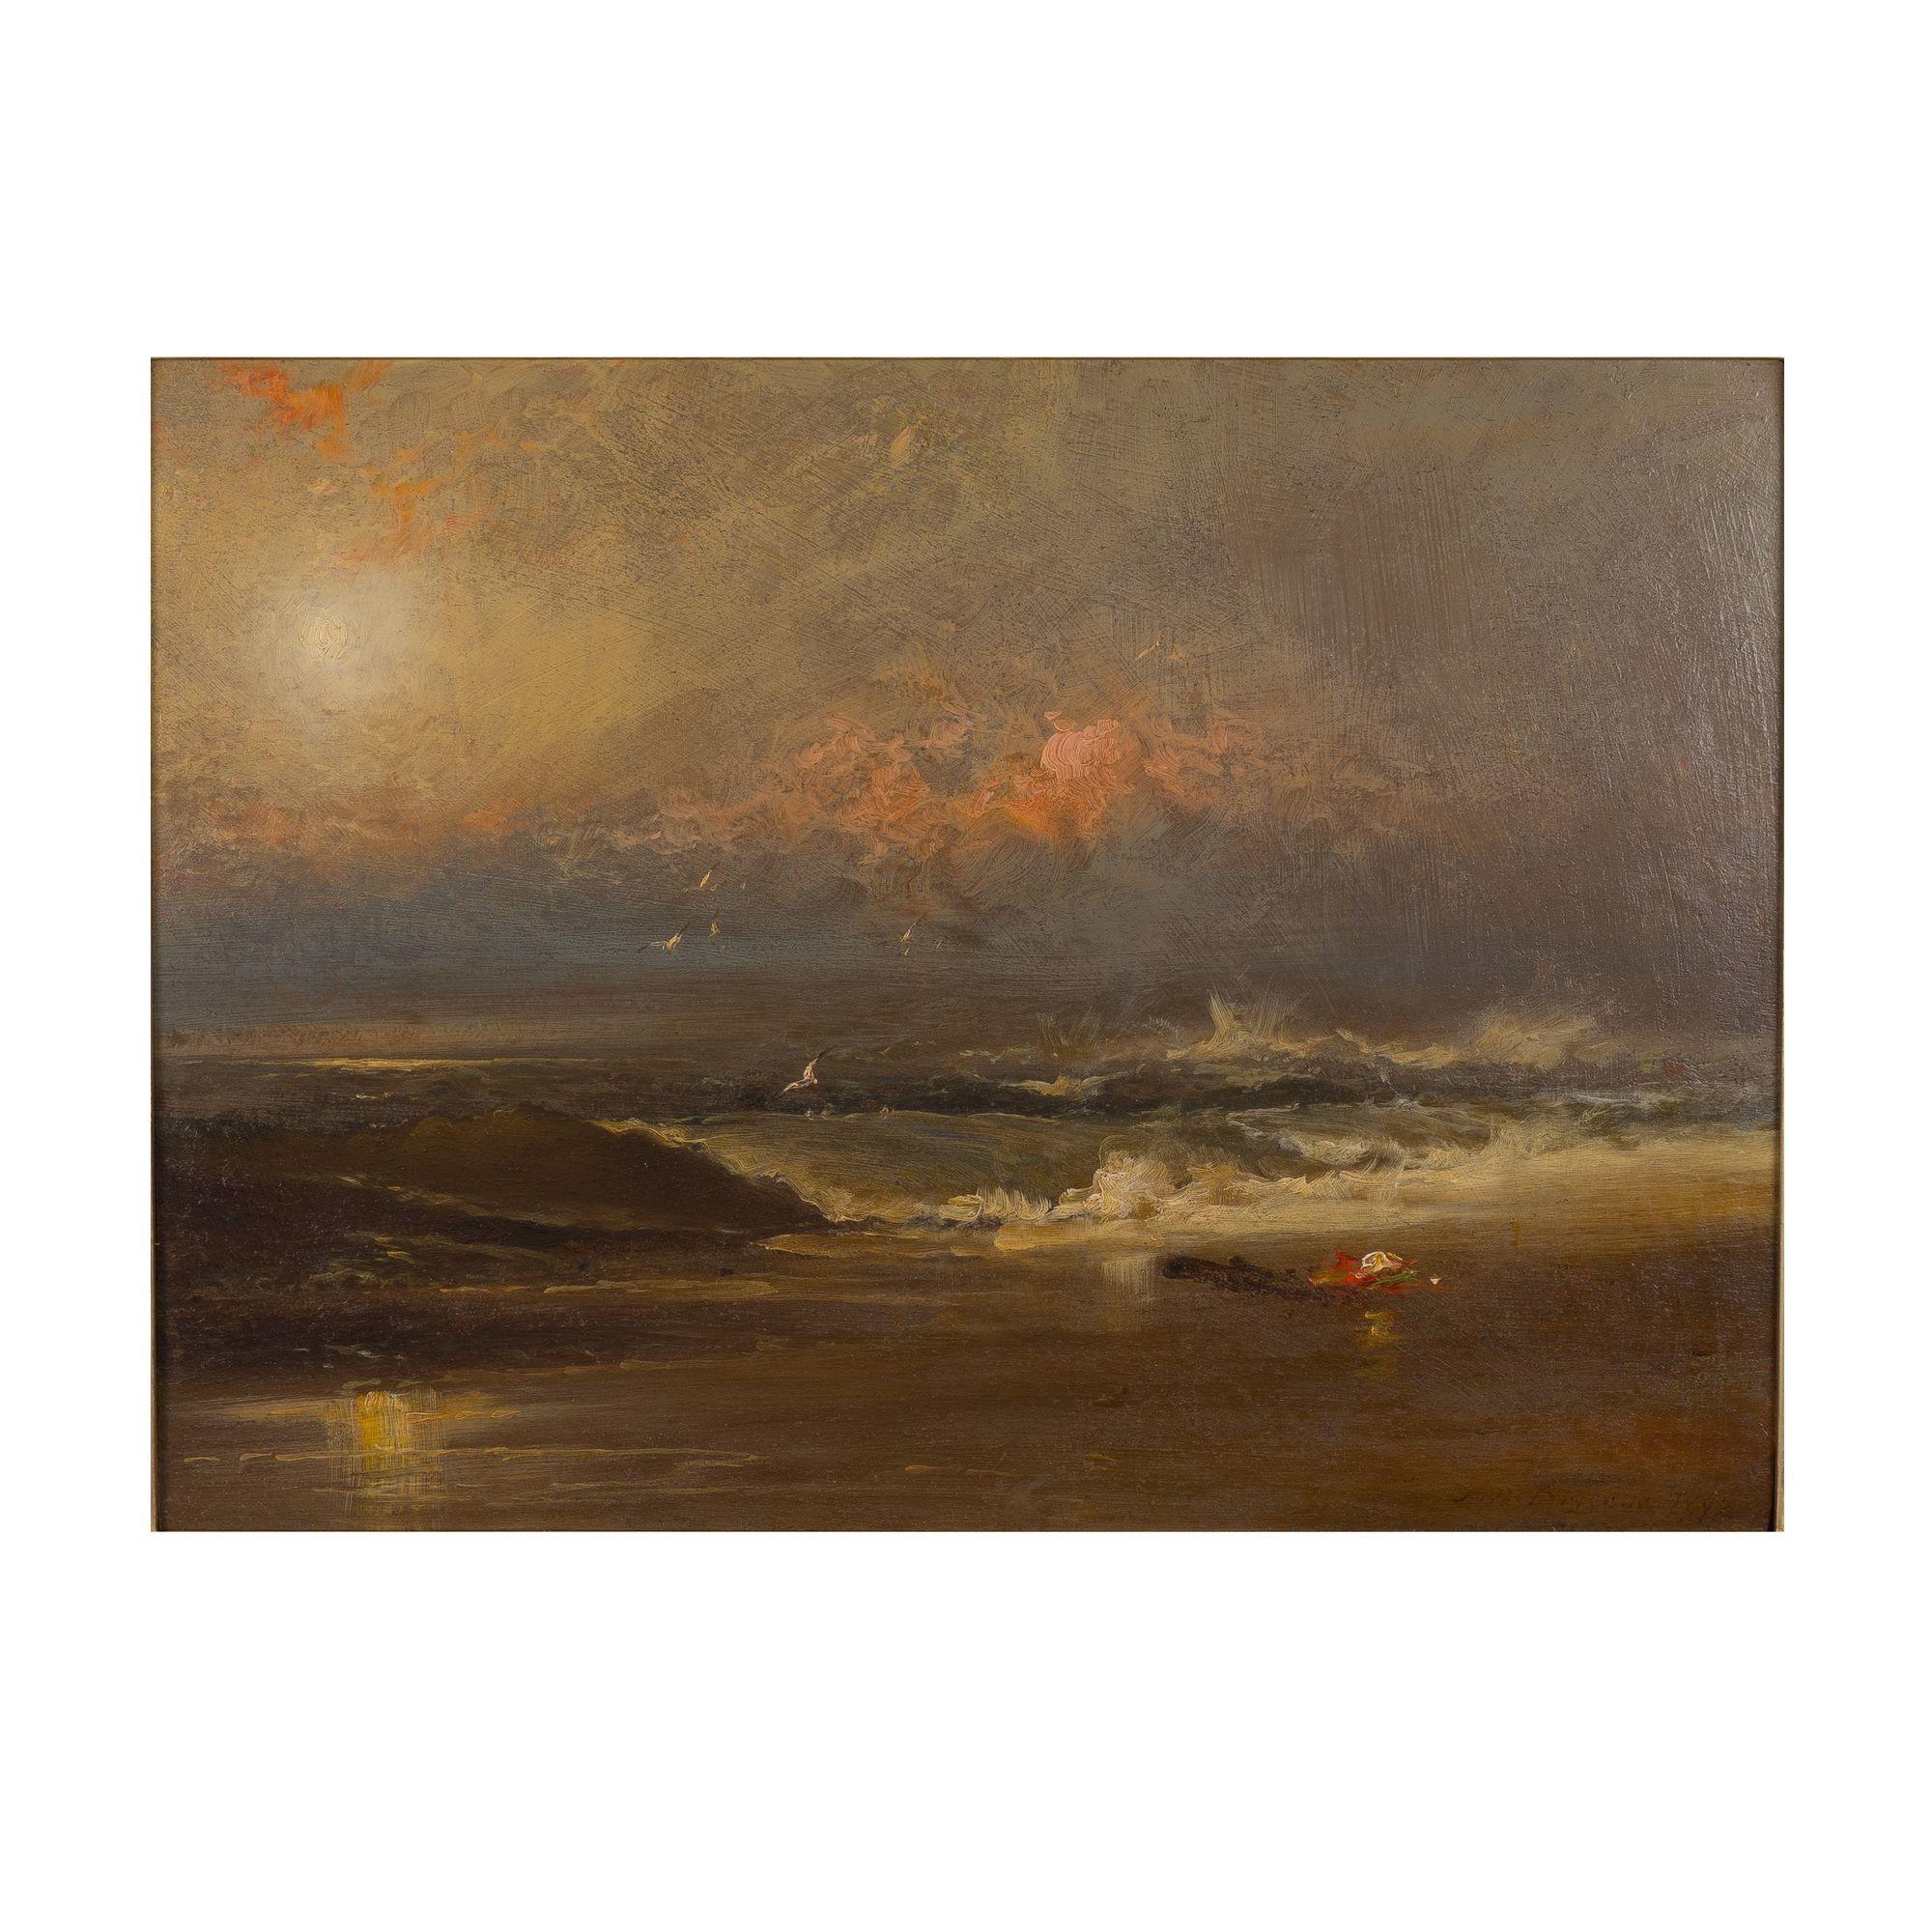 This oil on academy board work invokes an image of the shore after a storm, with luminescent fog settling on the storm tossed sea. Framed in a classic Hudson River School gold leafed fluted cove molding.

Signed in the canvas, lower right: F.D.